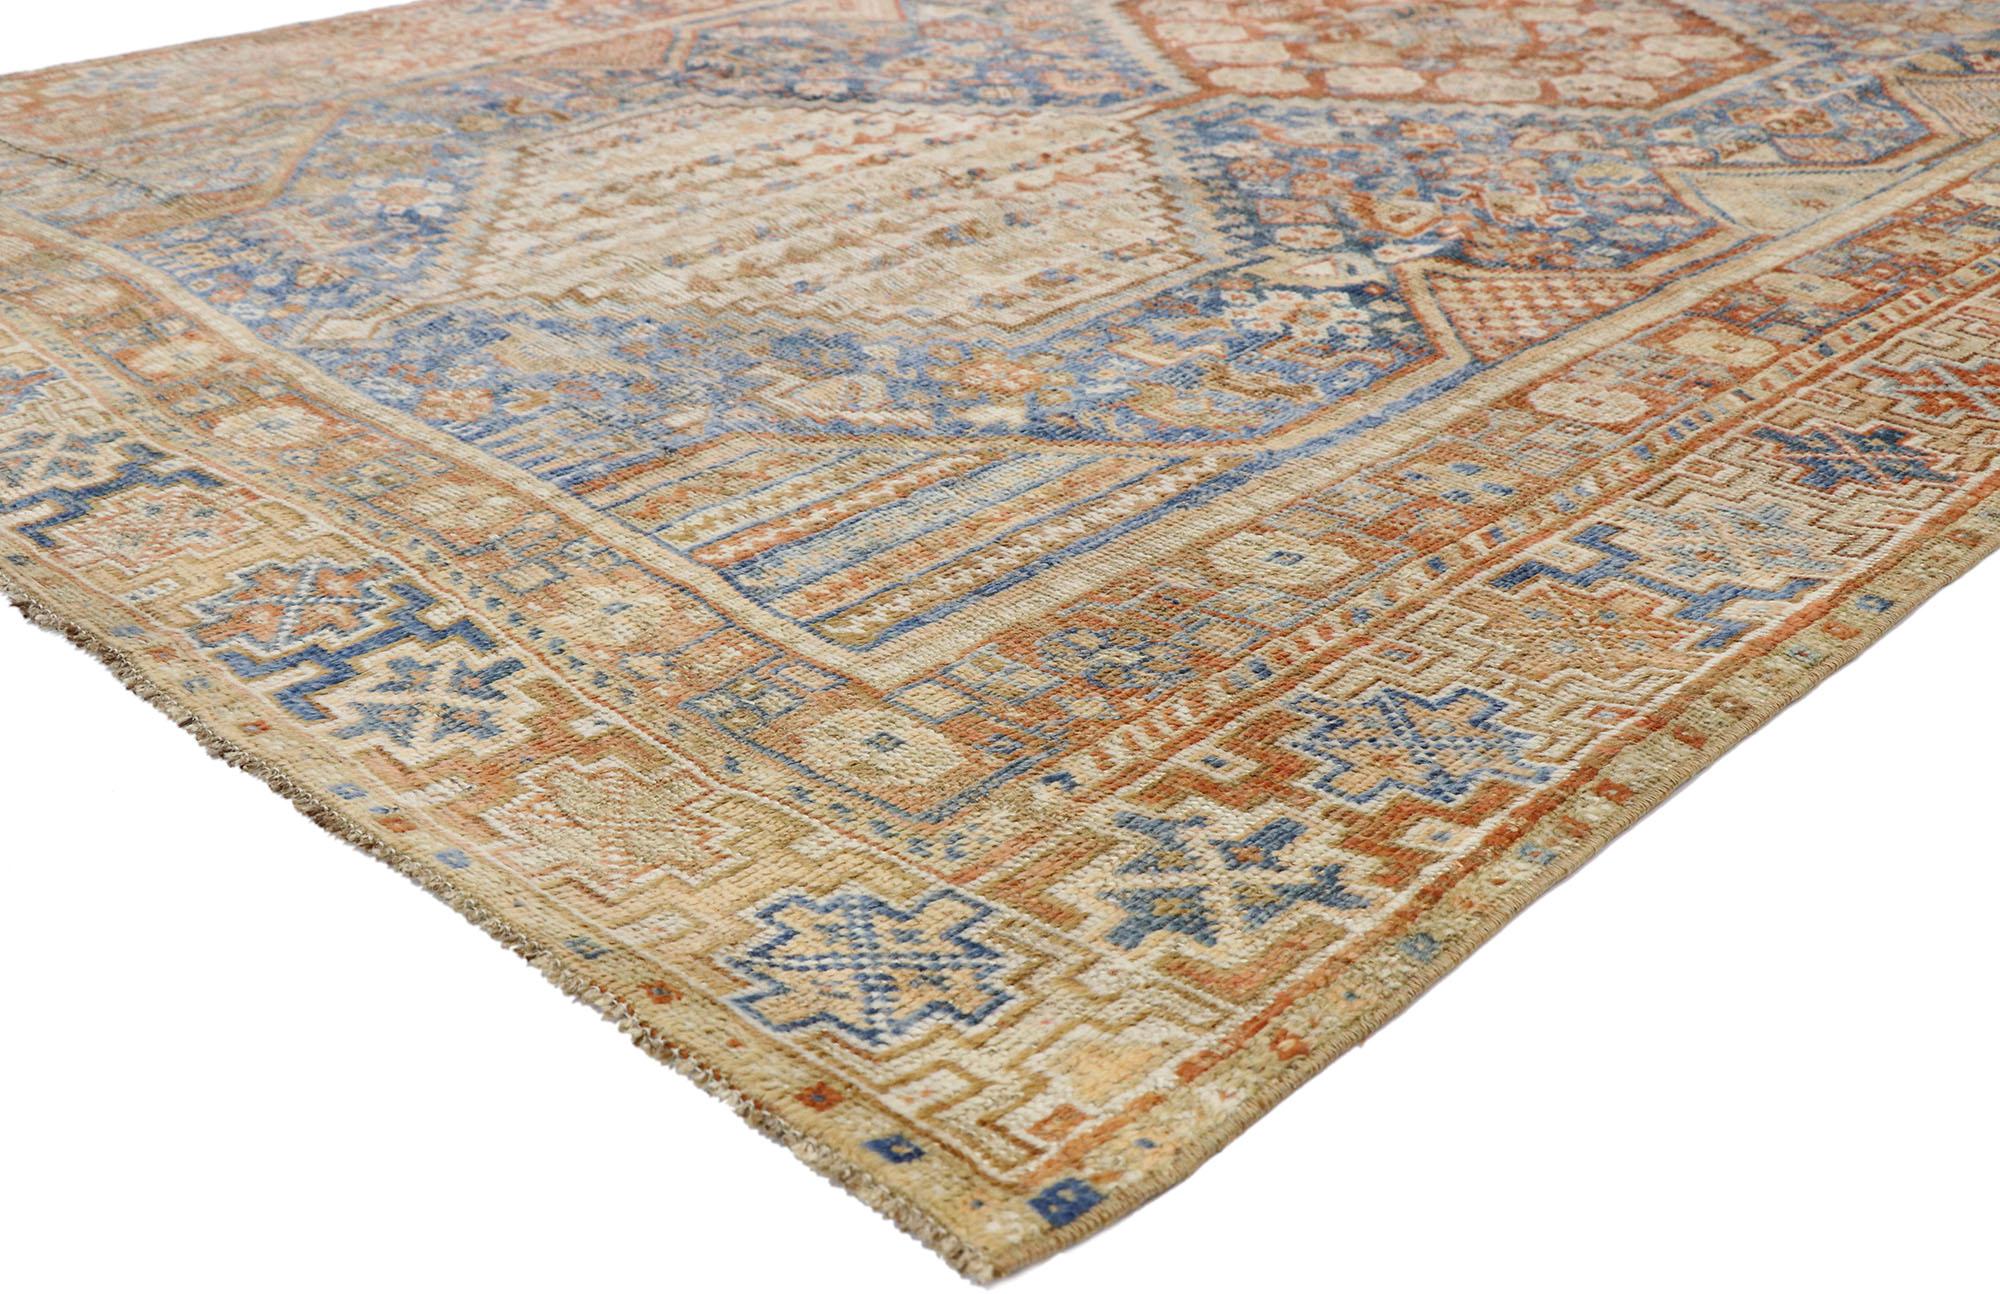 52677, distressed antique Persian Shiraz Design rug with Italian cottage rustic style. With brilliant blues and warm terracotta hues inspired by Italy, this hand knotted wool antique Persian Shiraz rug beautifully embodies an Italian Rustic style.